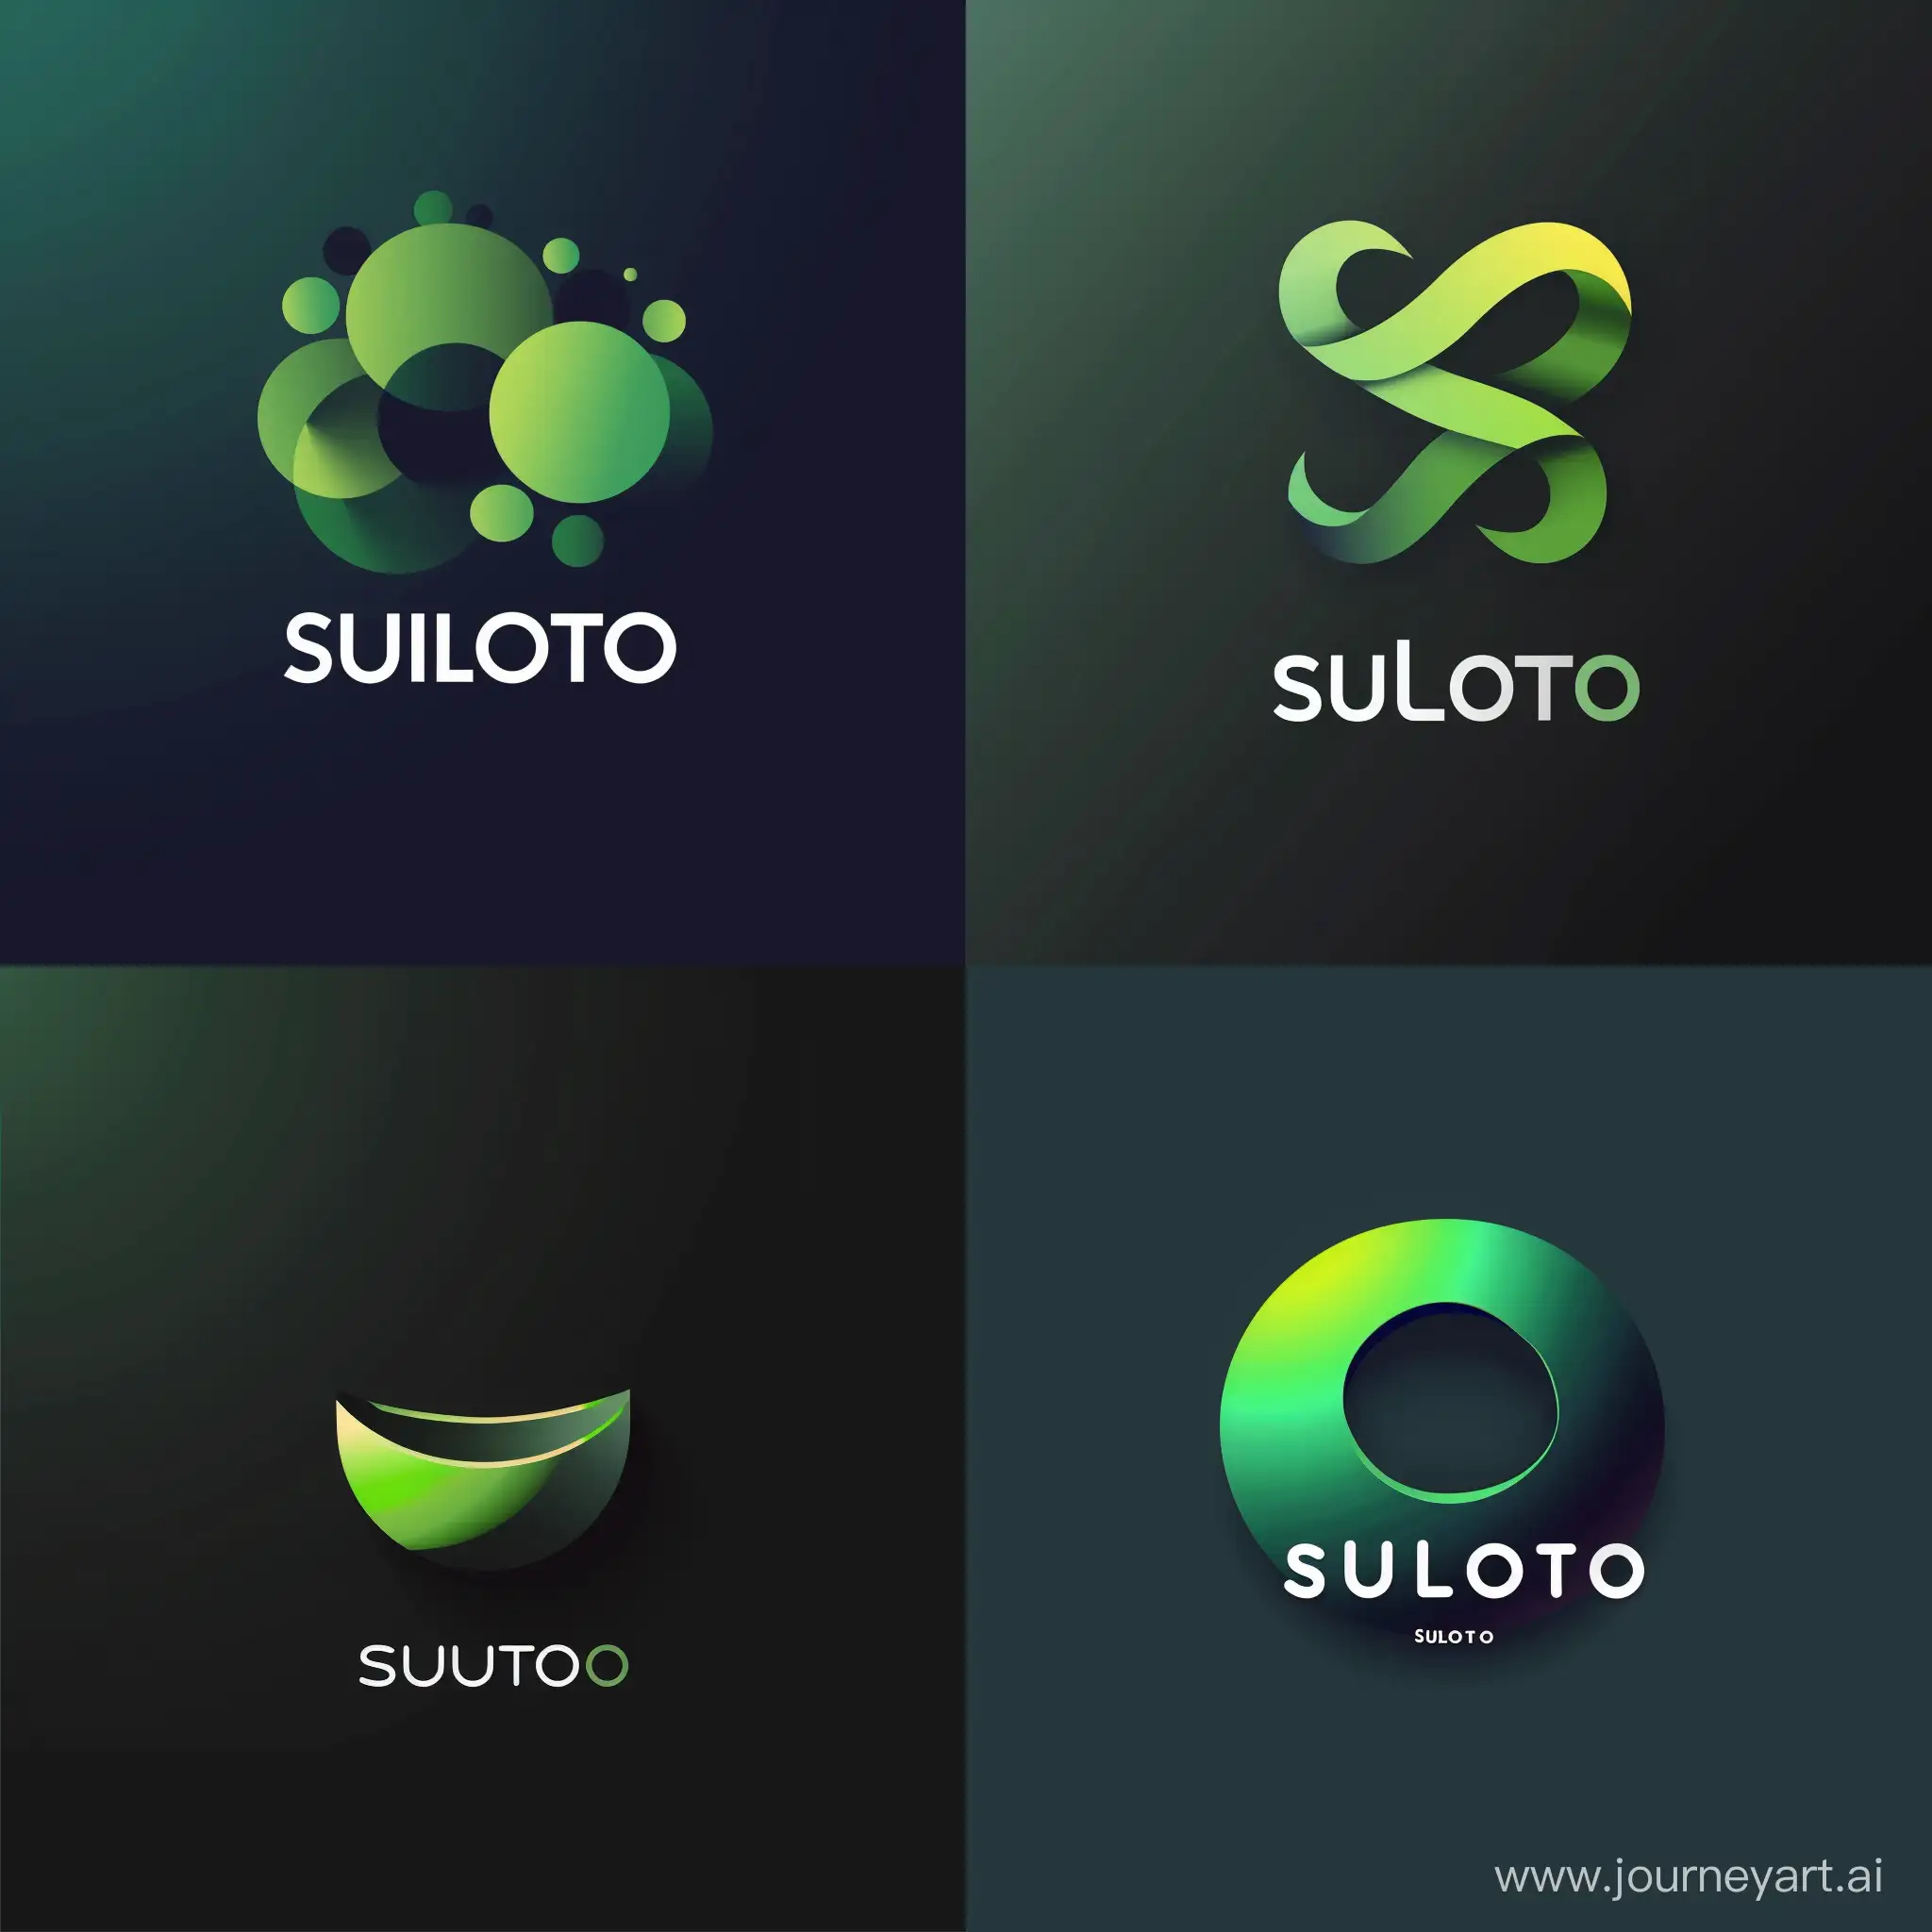 Minimal-Green-Abstract-Logo-Design-with-Text-Suloto